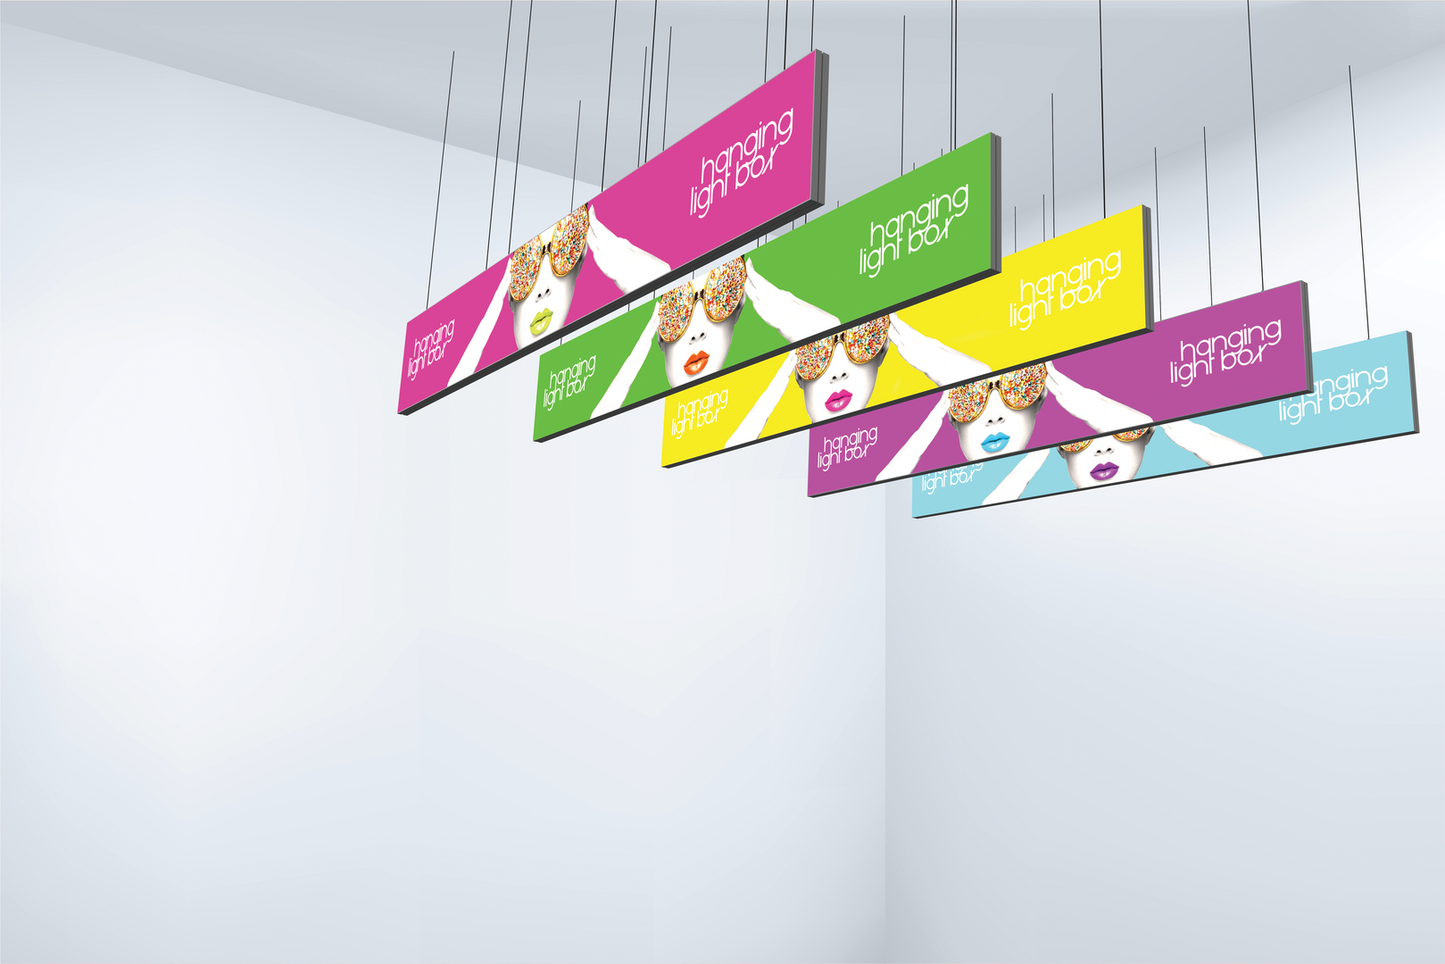 40ft x 4ft Vector Frame Hanging Light Box Double-Sided (Graphic Only)